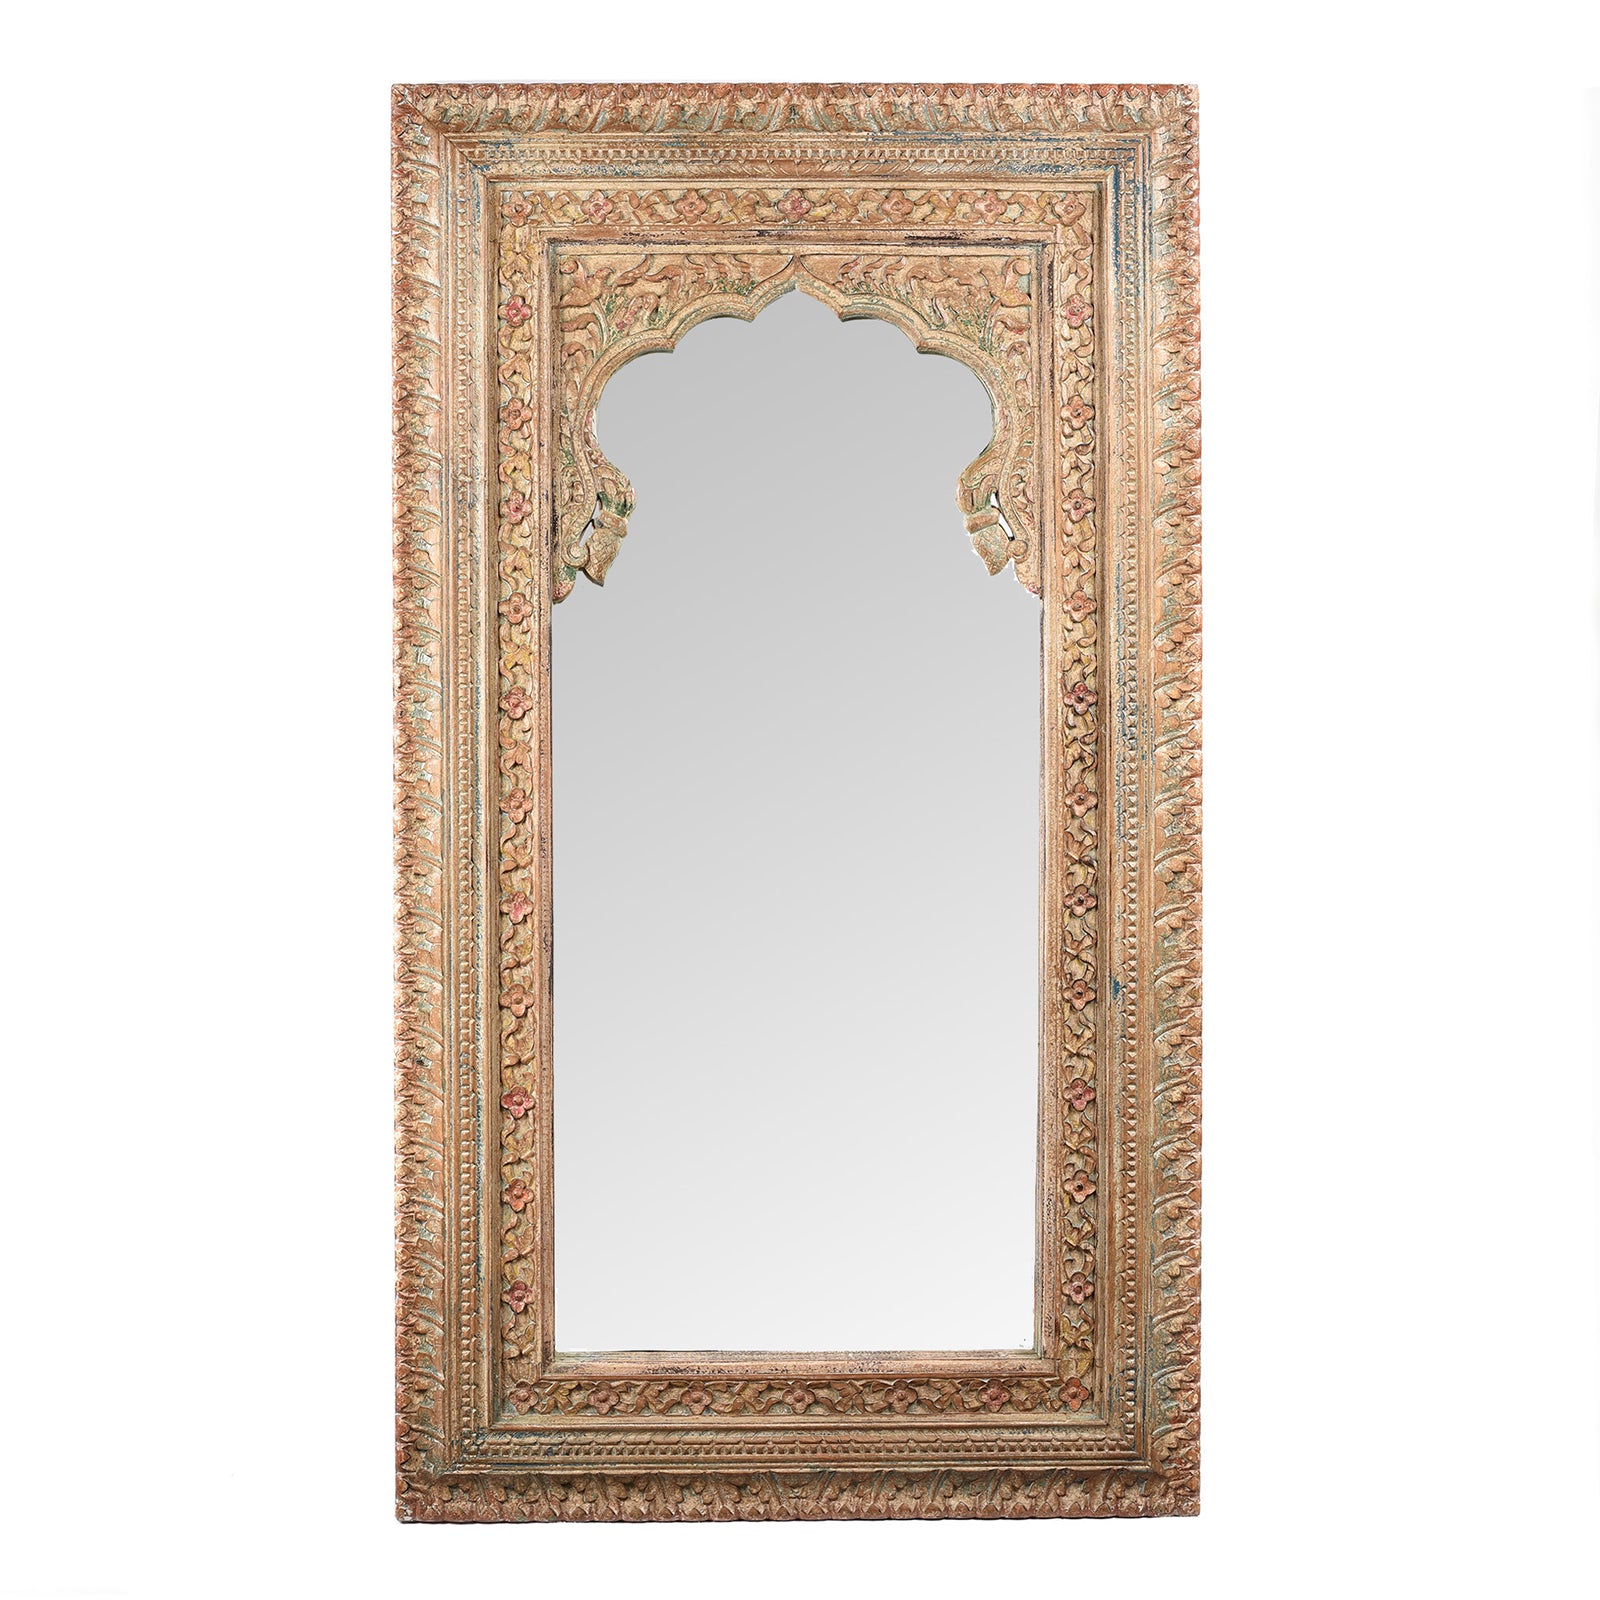 Carved Large Mihrab Mirror Frame - Limed And Painted Finish | Indigo Antiques